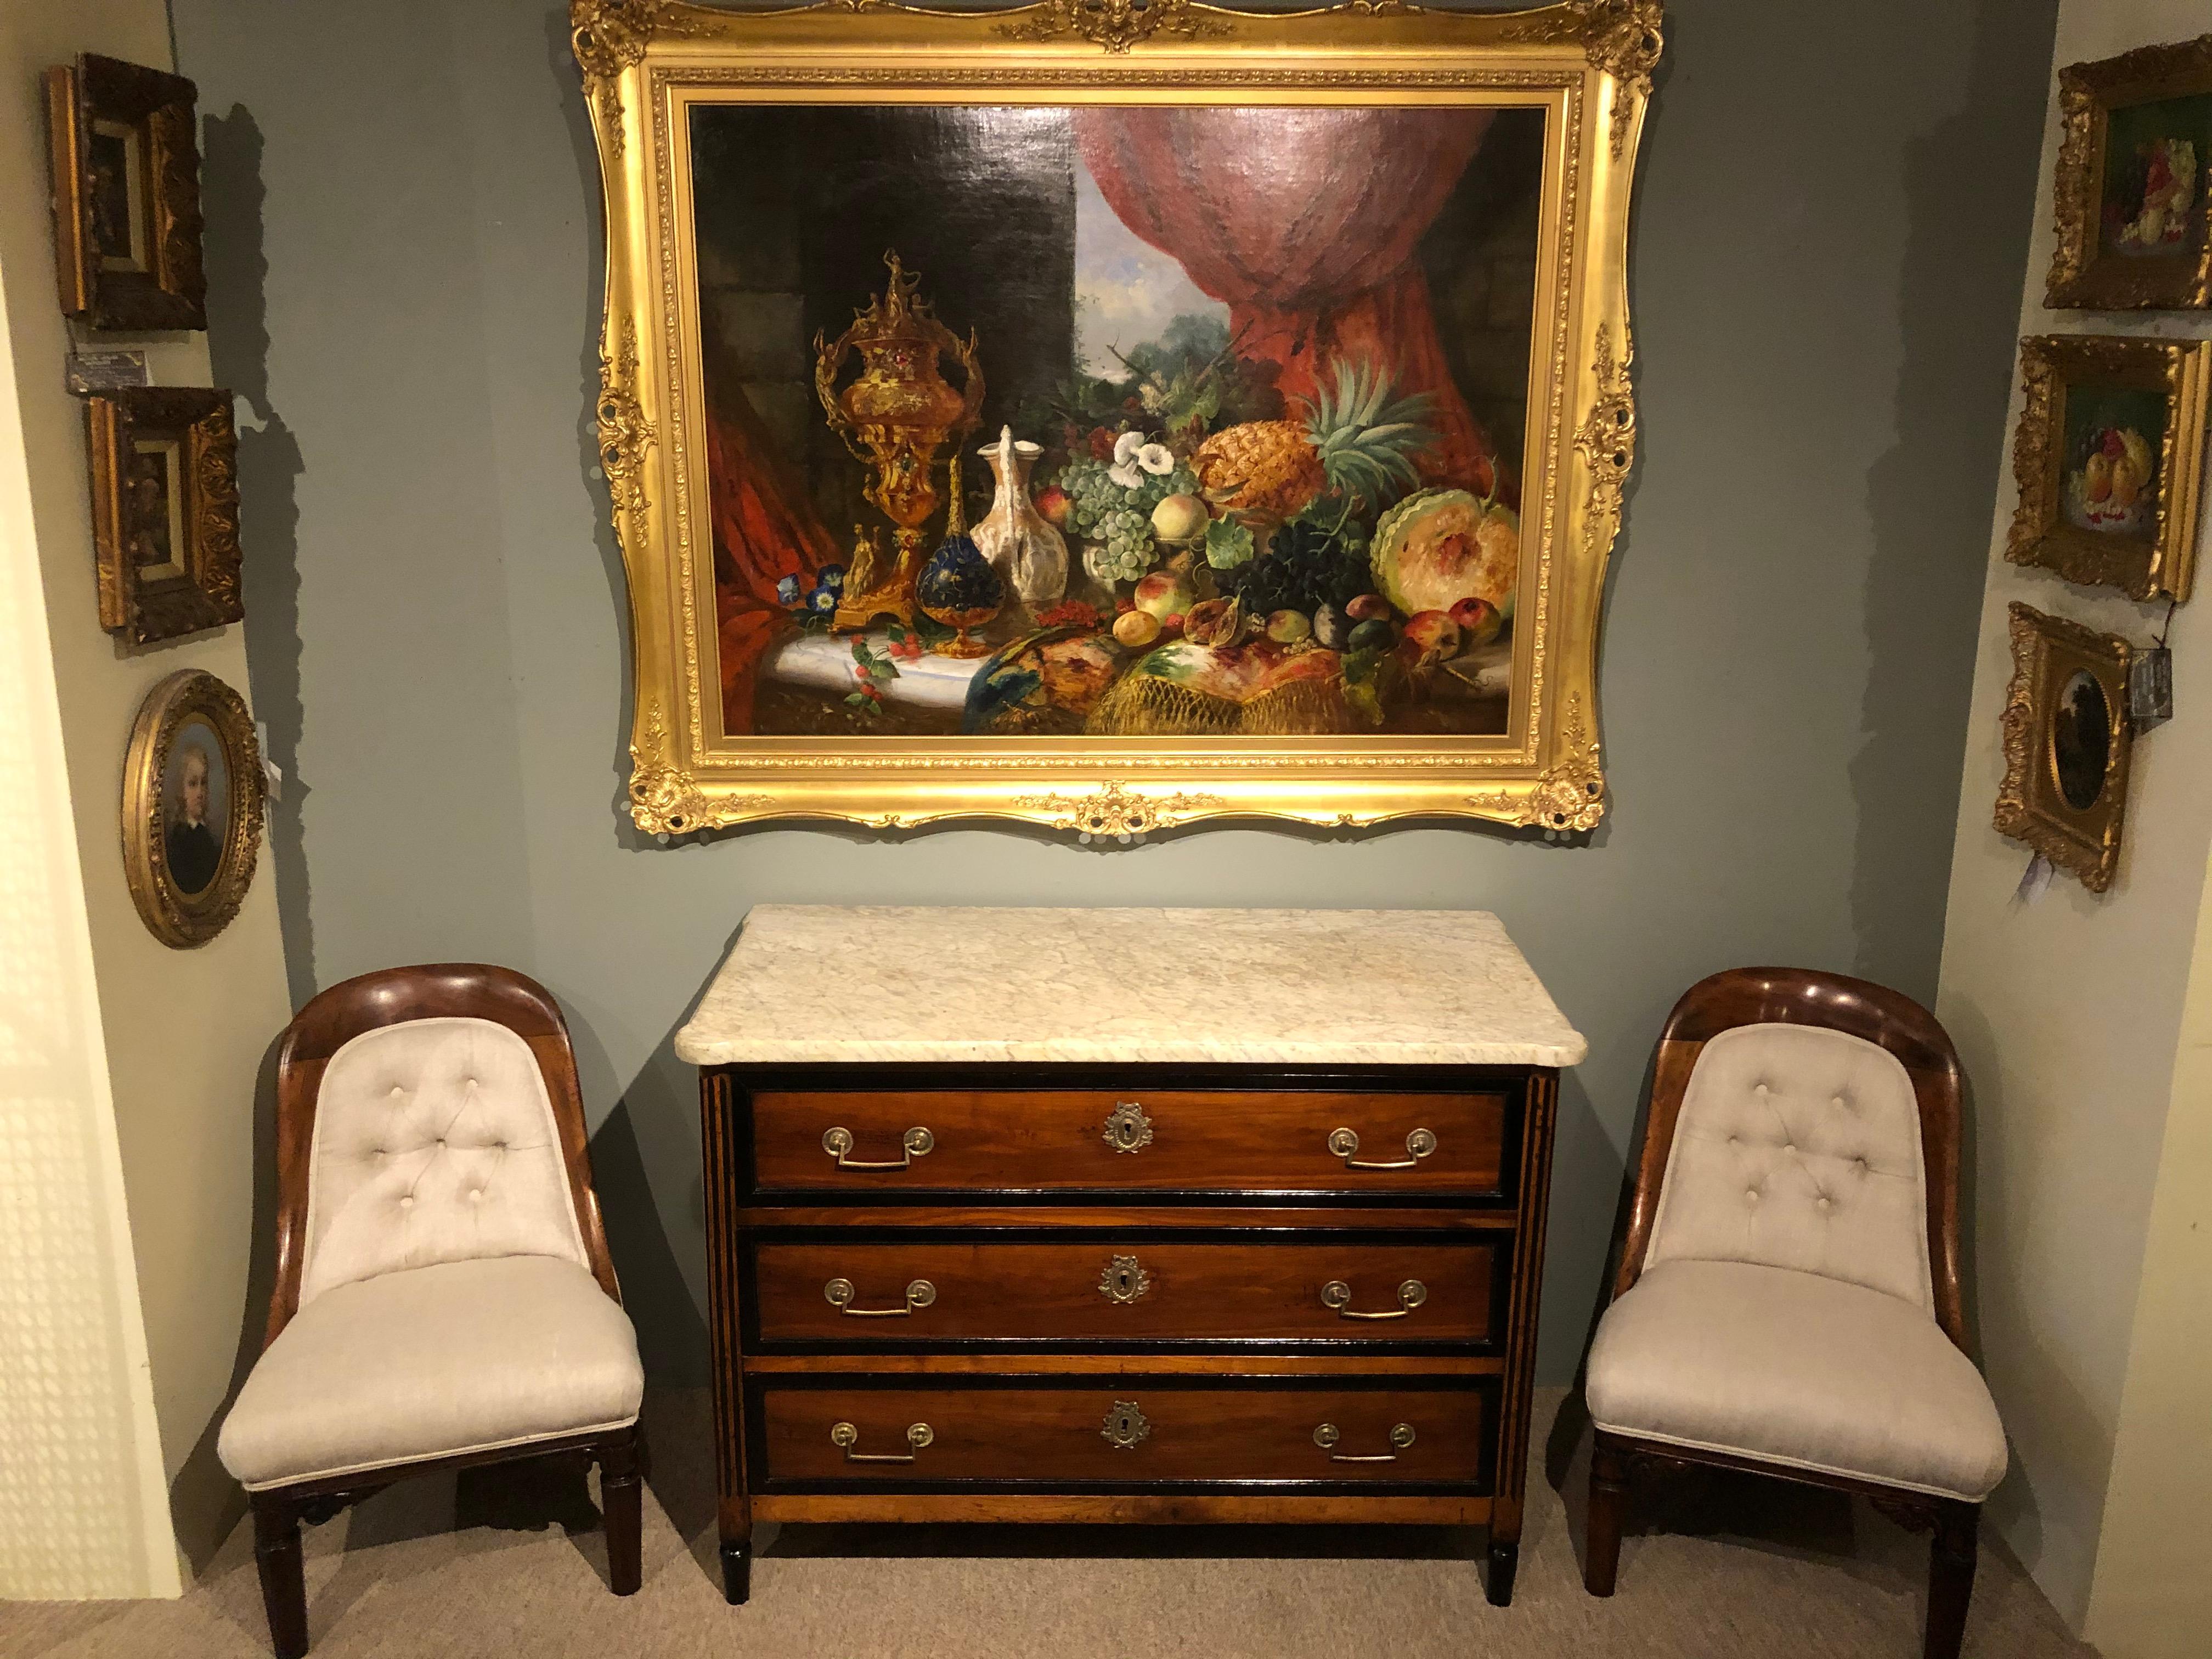 Handsome Louis XVI fruitwood and ebonized commode chest of drawers with original marble top and handles, with mirrored side panels and ebonized mouldings sympathetically restored by one of the UK's top furniture conservators.